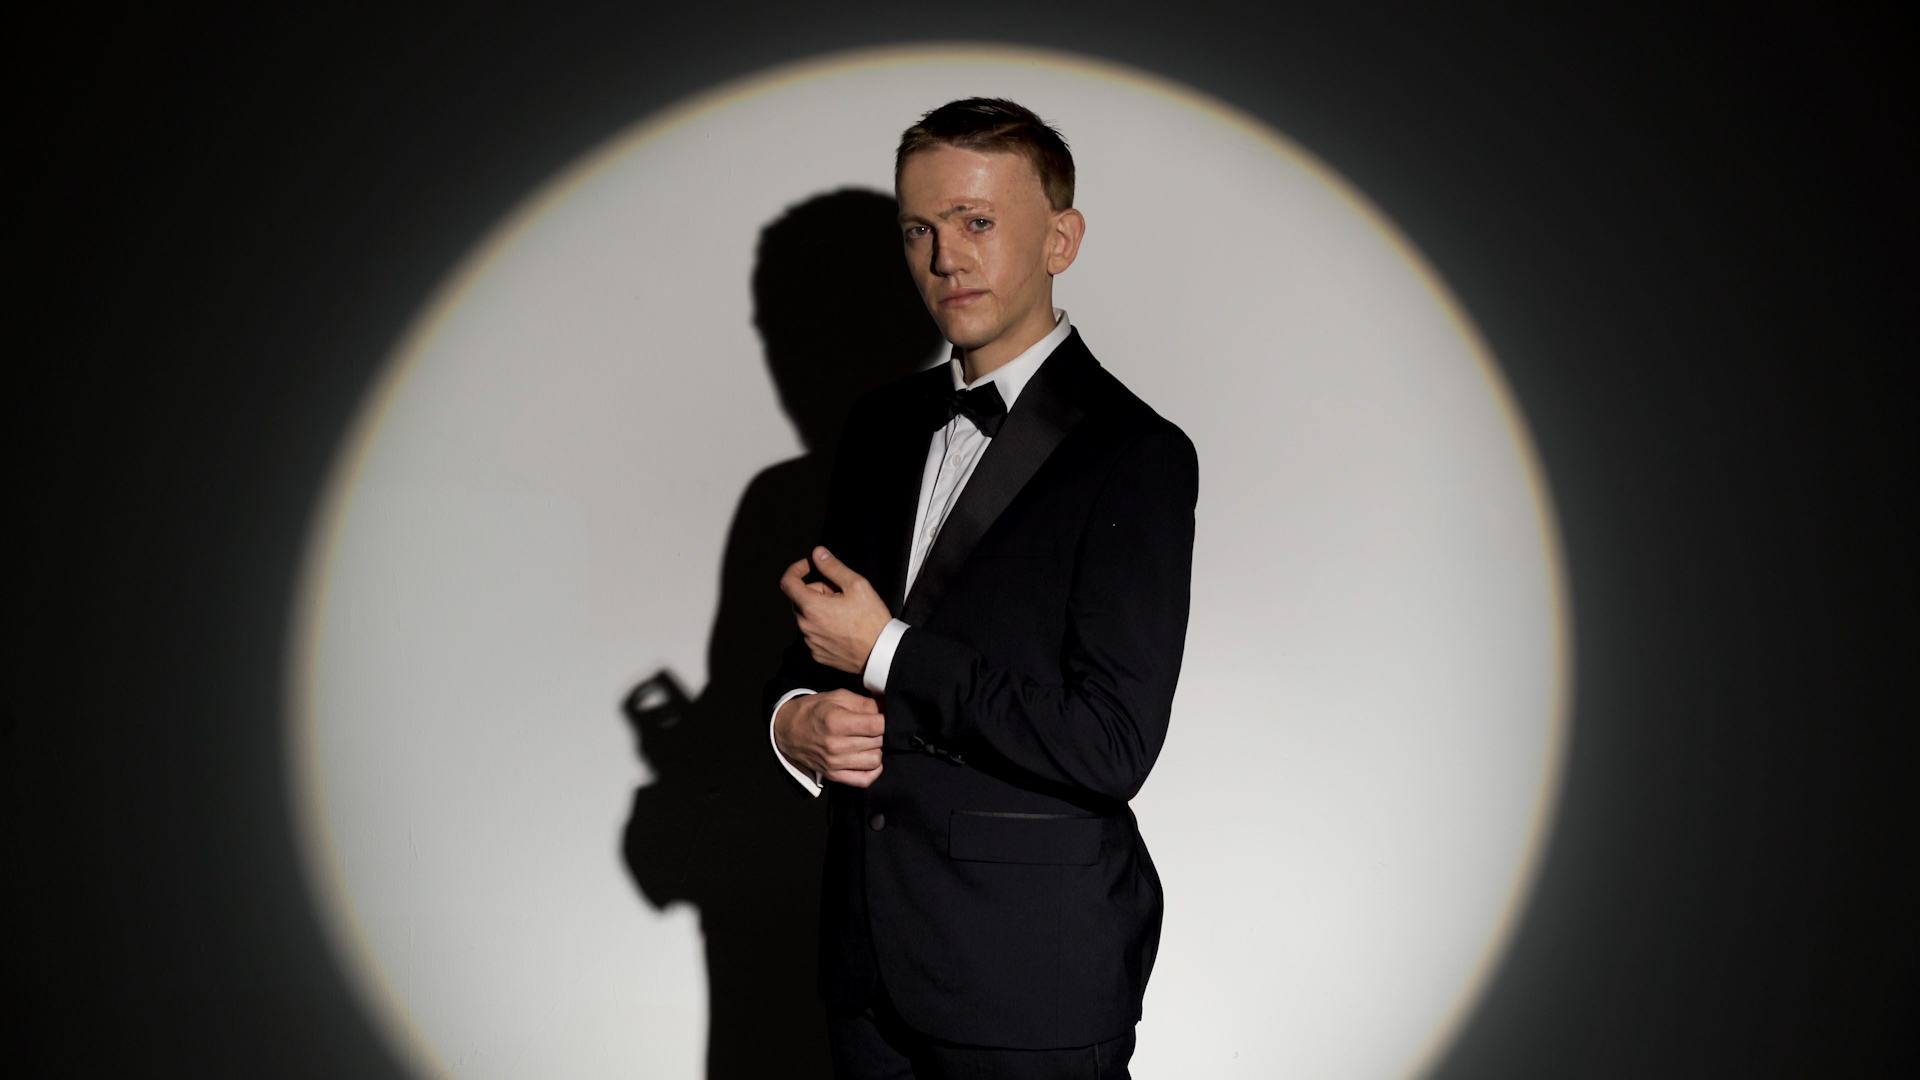 A man with a visible difference dressed like James Bond, in a black suit and bow tie, illuminated by a spotlight.